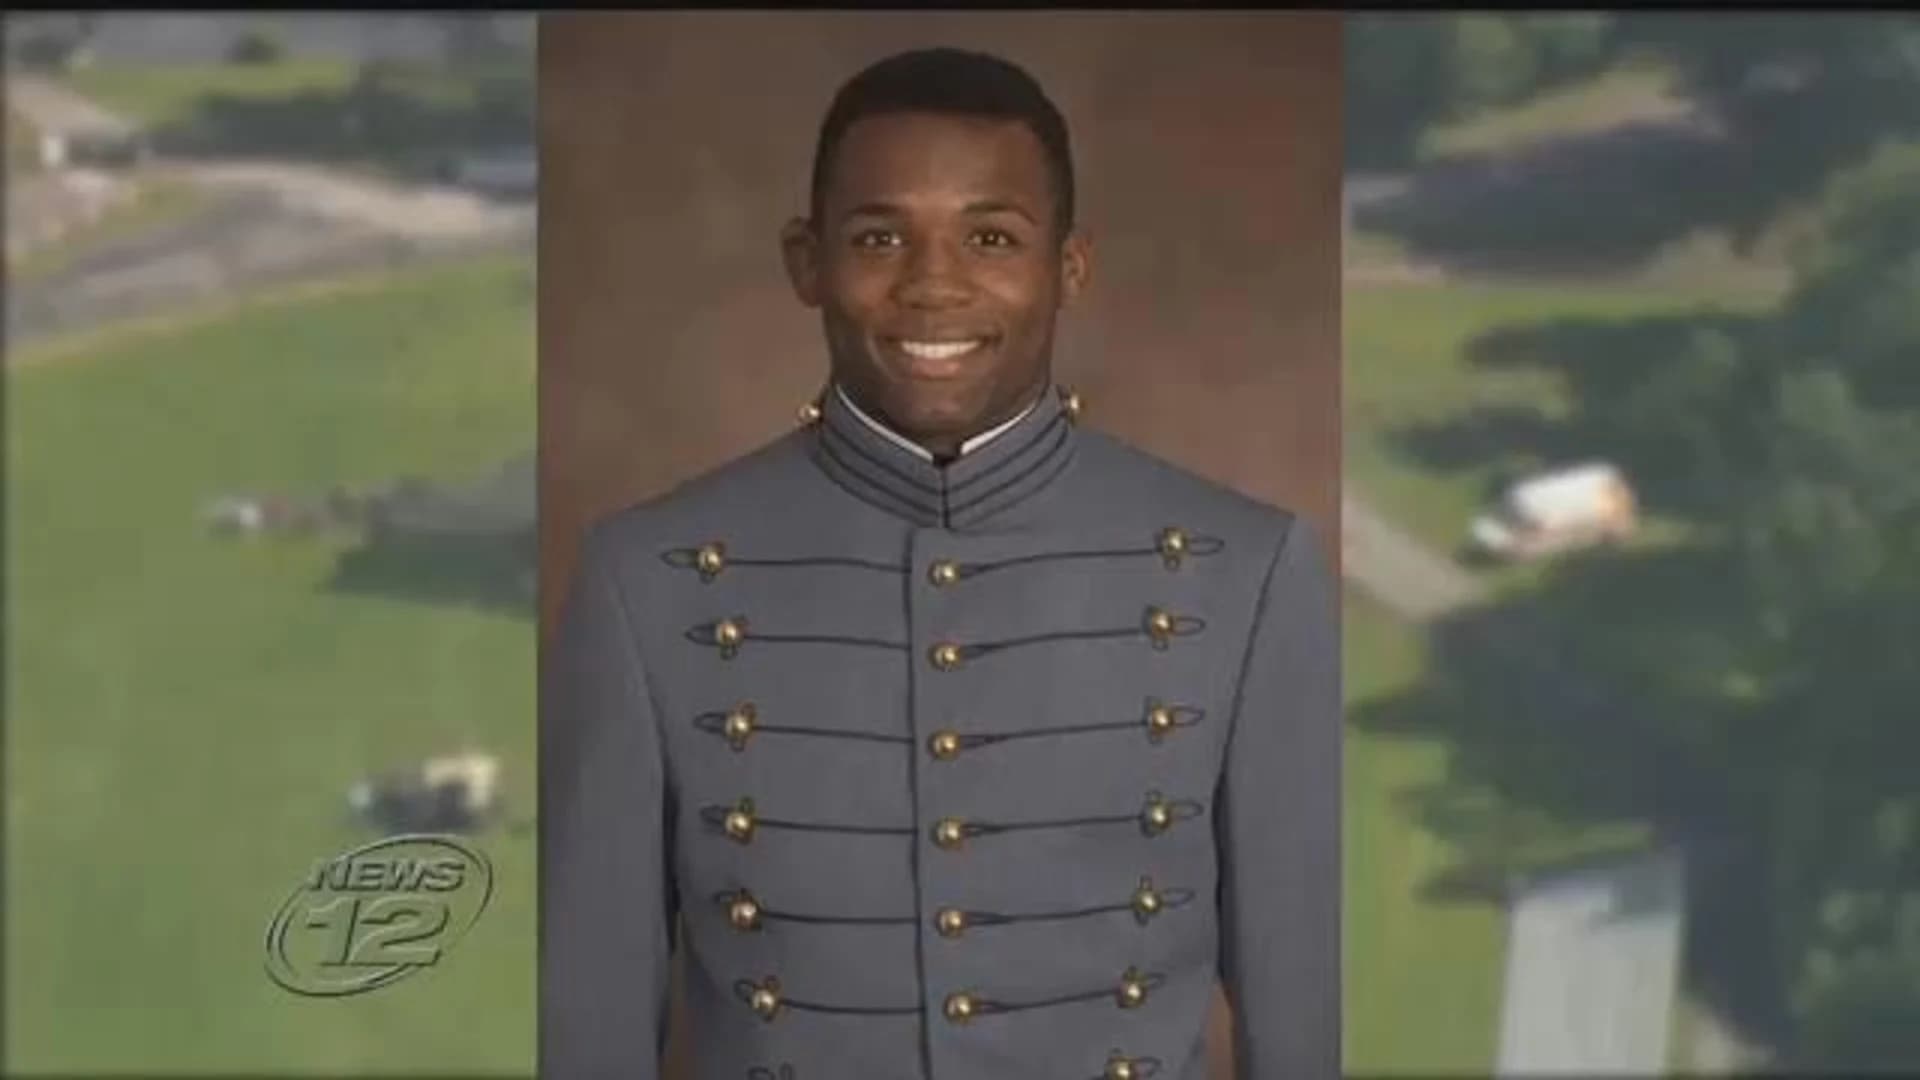 Court-martial trial set in crash that killed West Point cadet from New Jersey